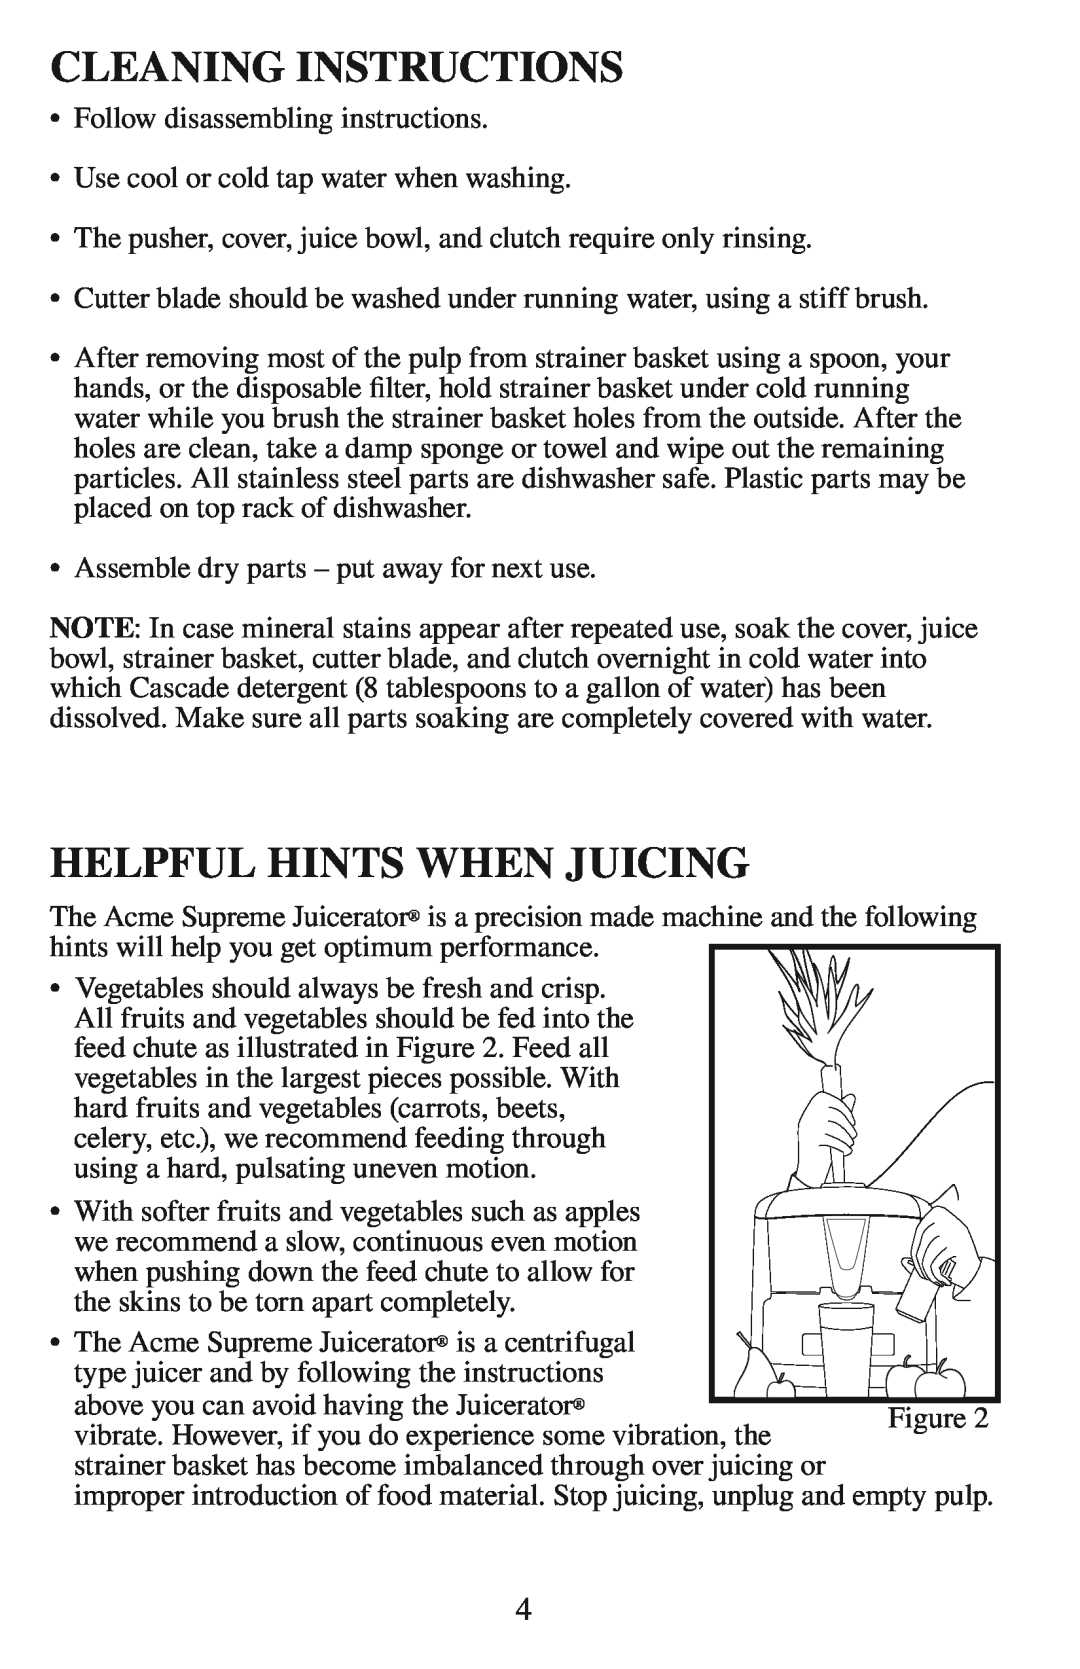 Acme Kitchenettes 6001 manual Cleaning Instructions, Helpful Hints When Juicing 